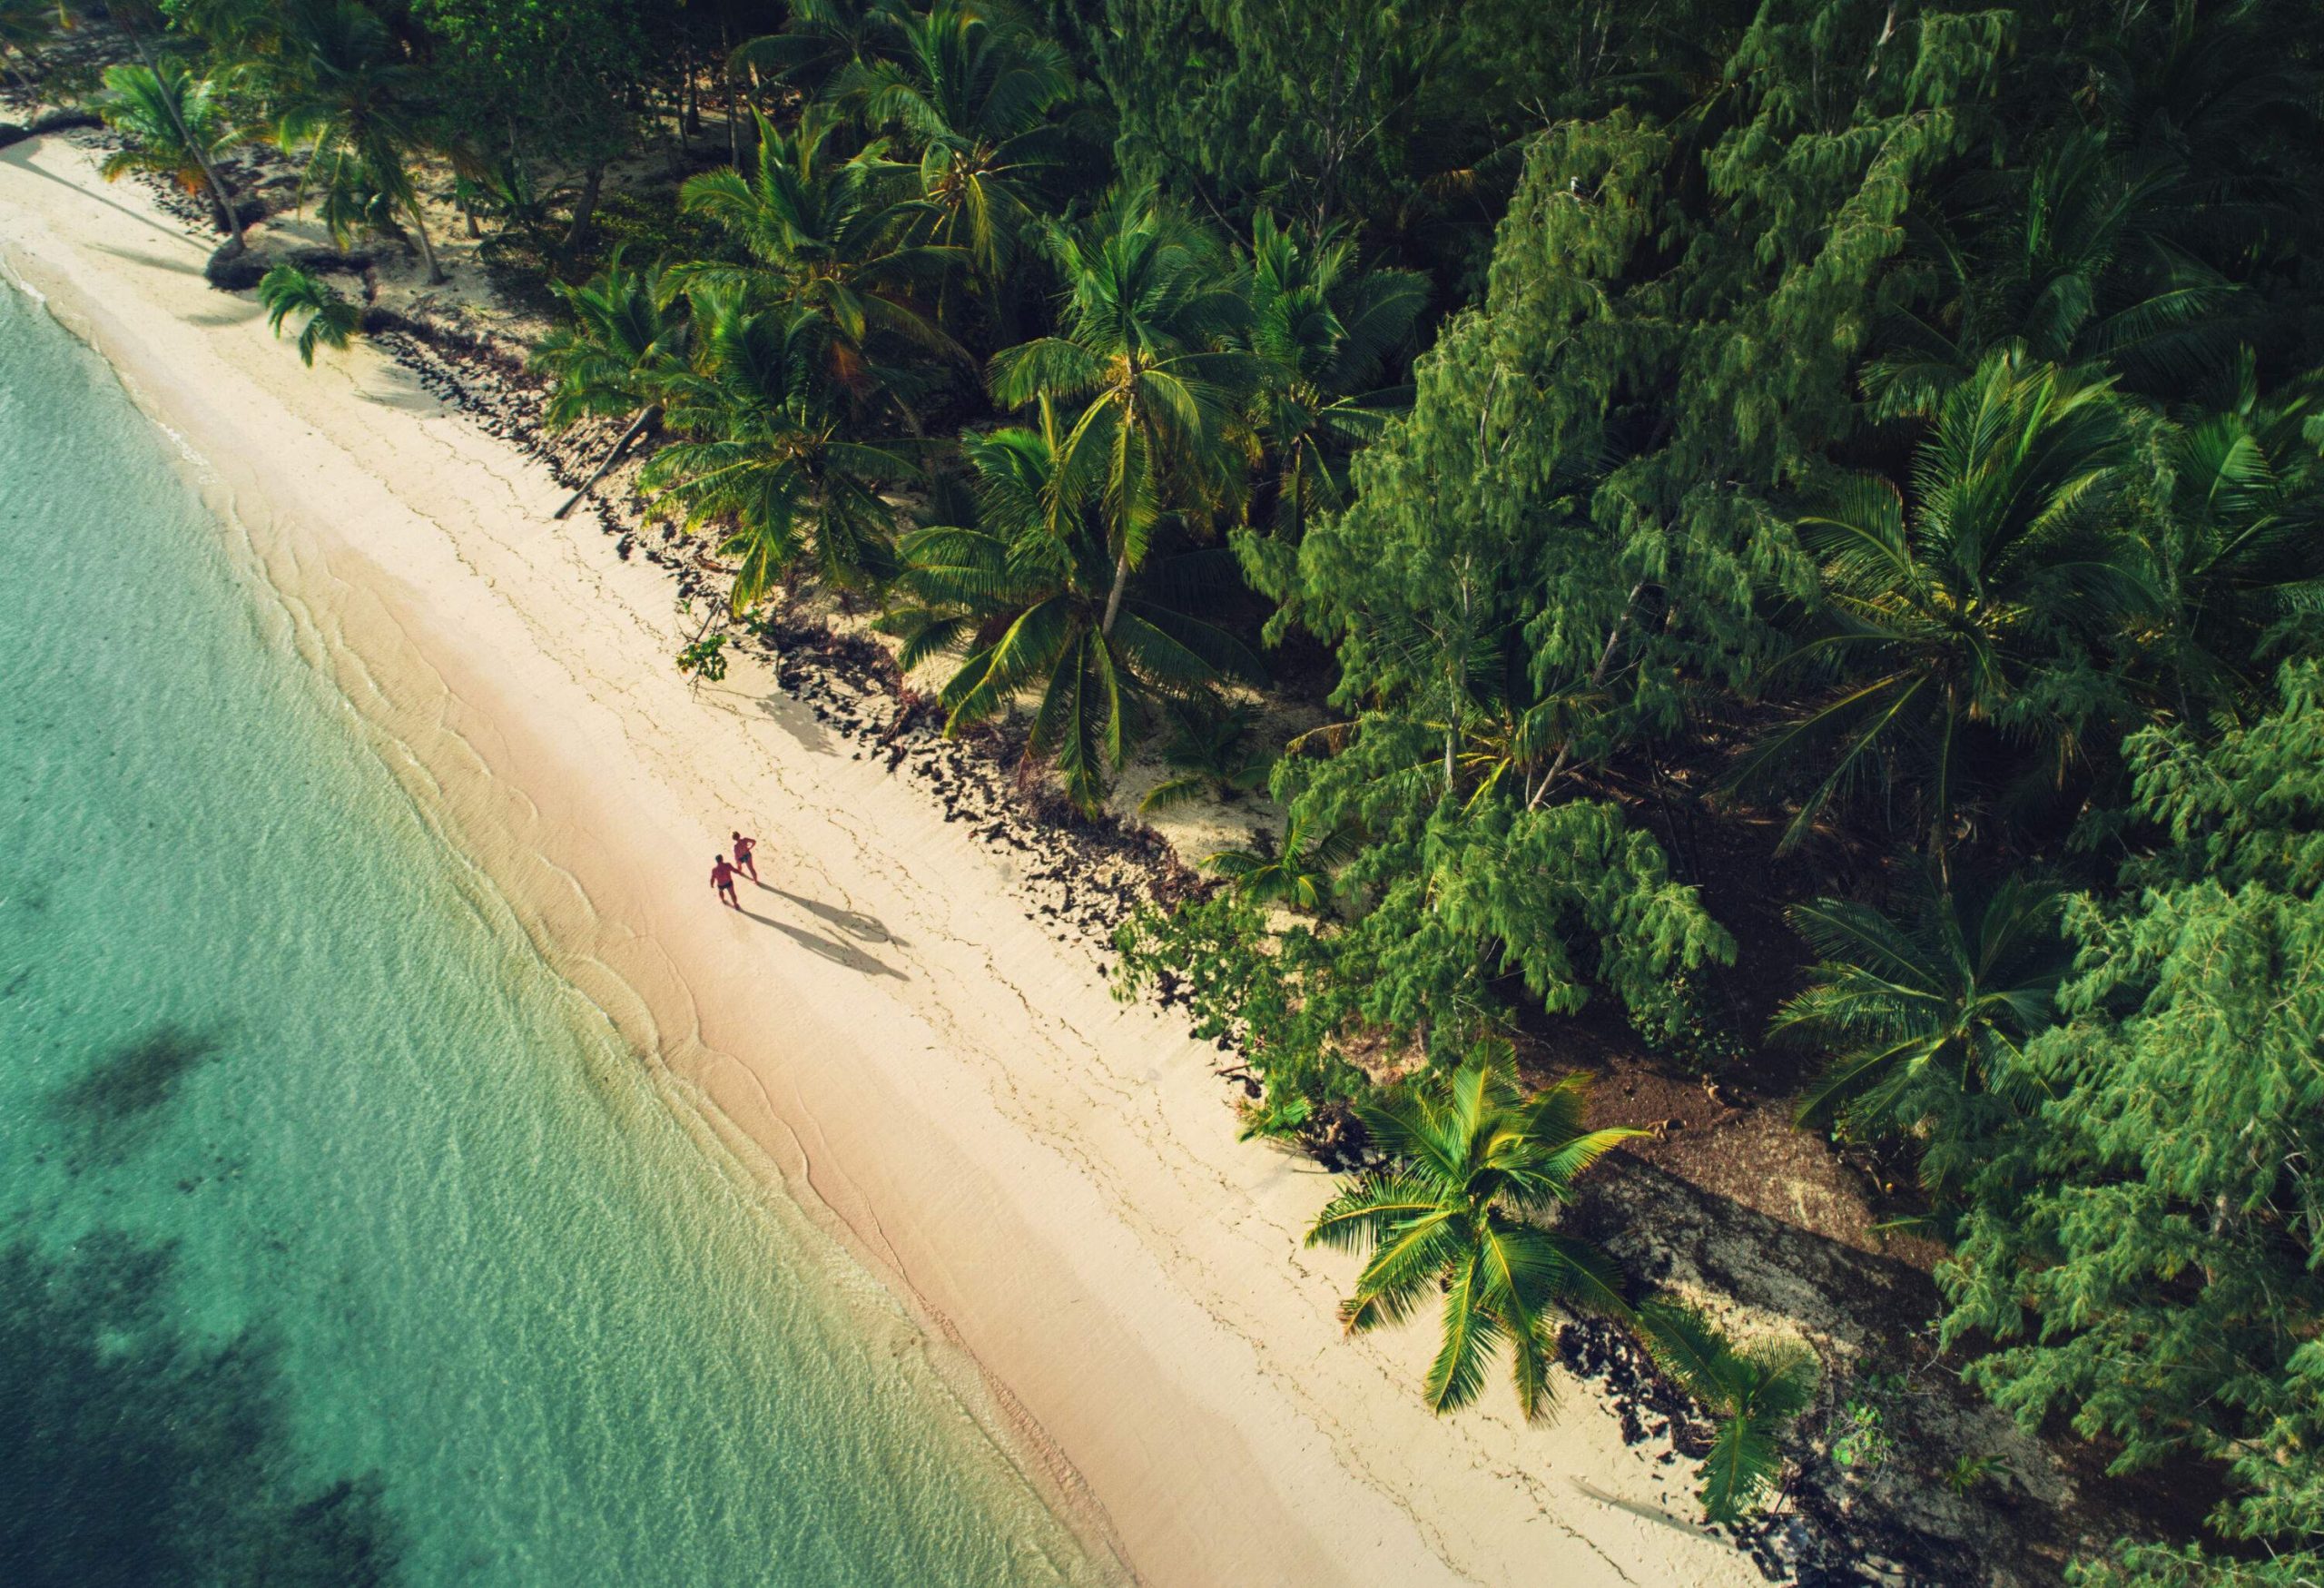 An aerial view of a couple walking on the sandy beach along the forest.